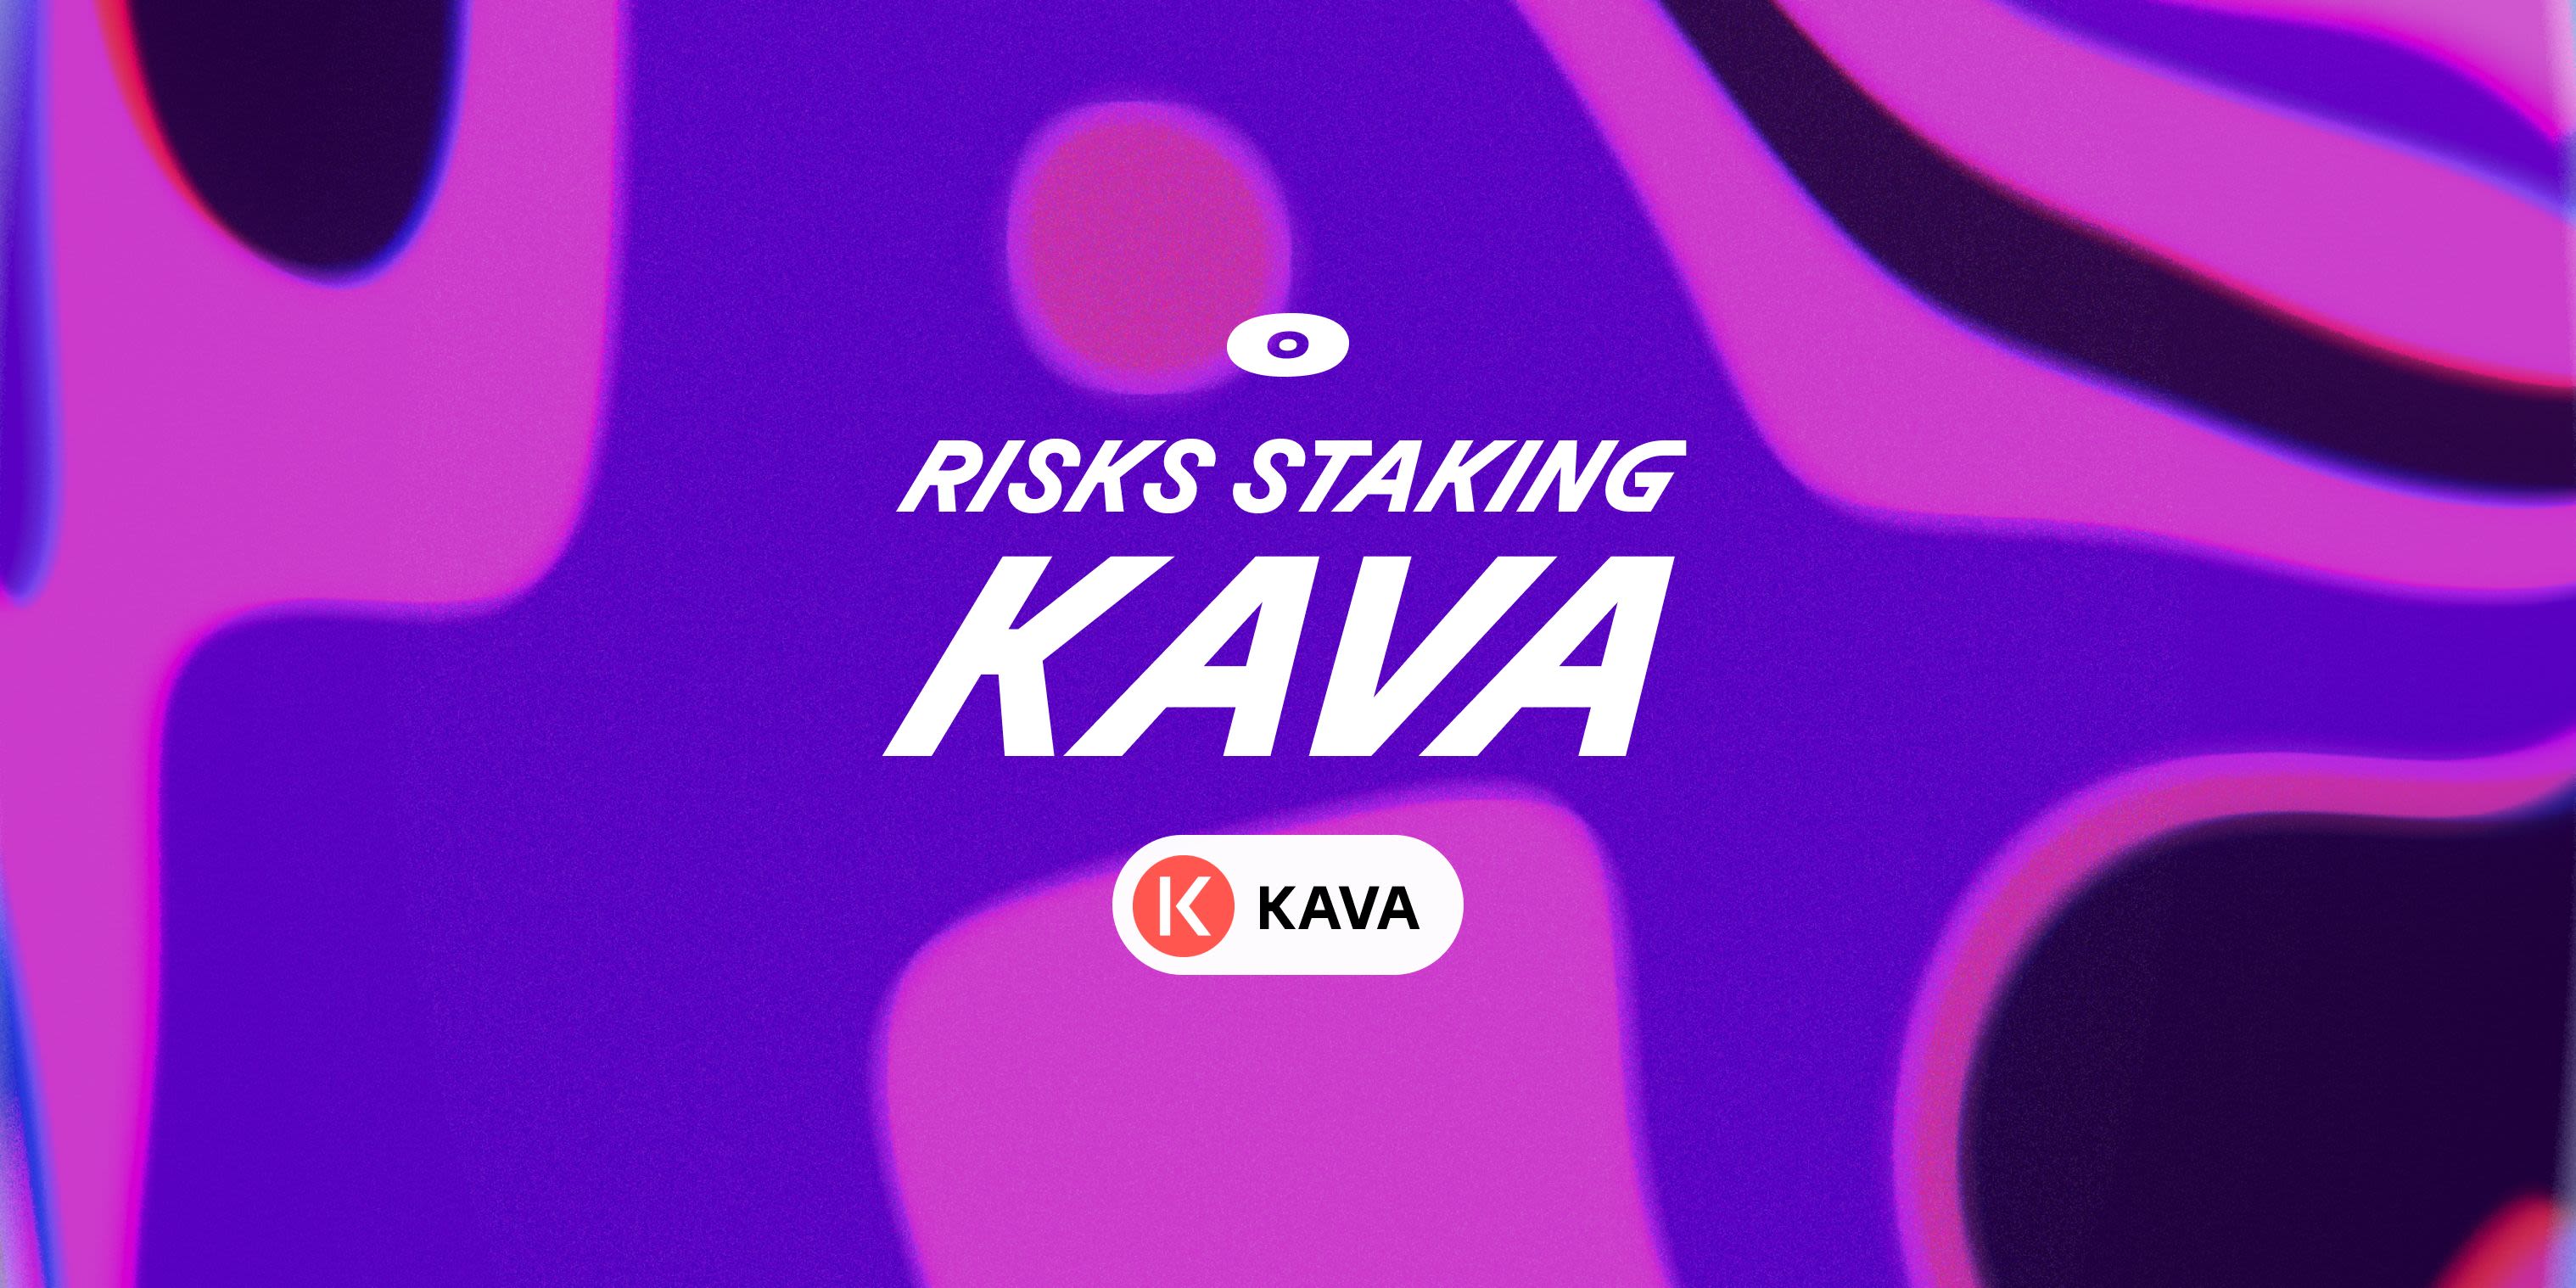 Cover Image for Risks of staking KAVA